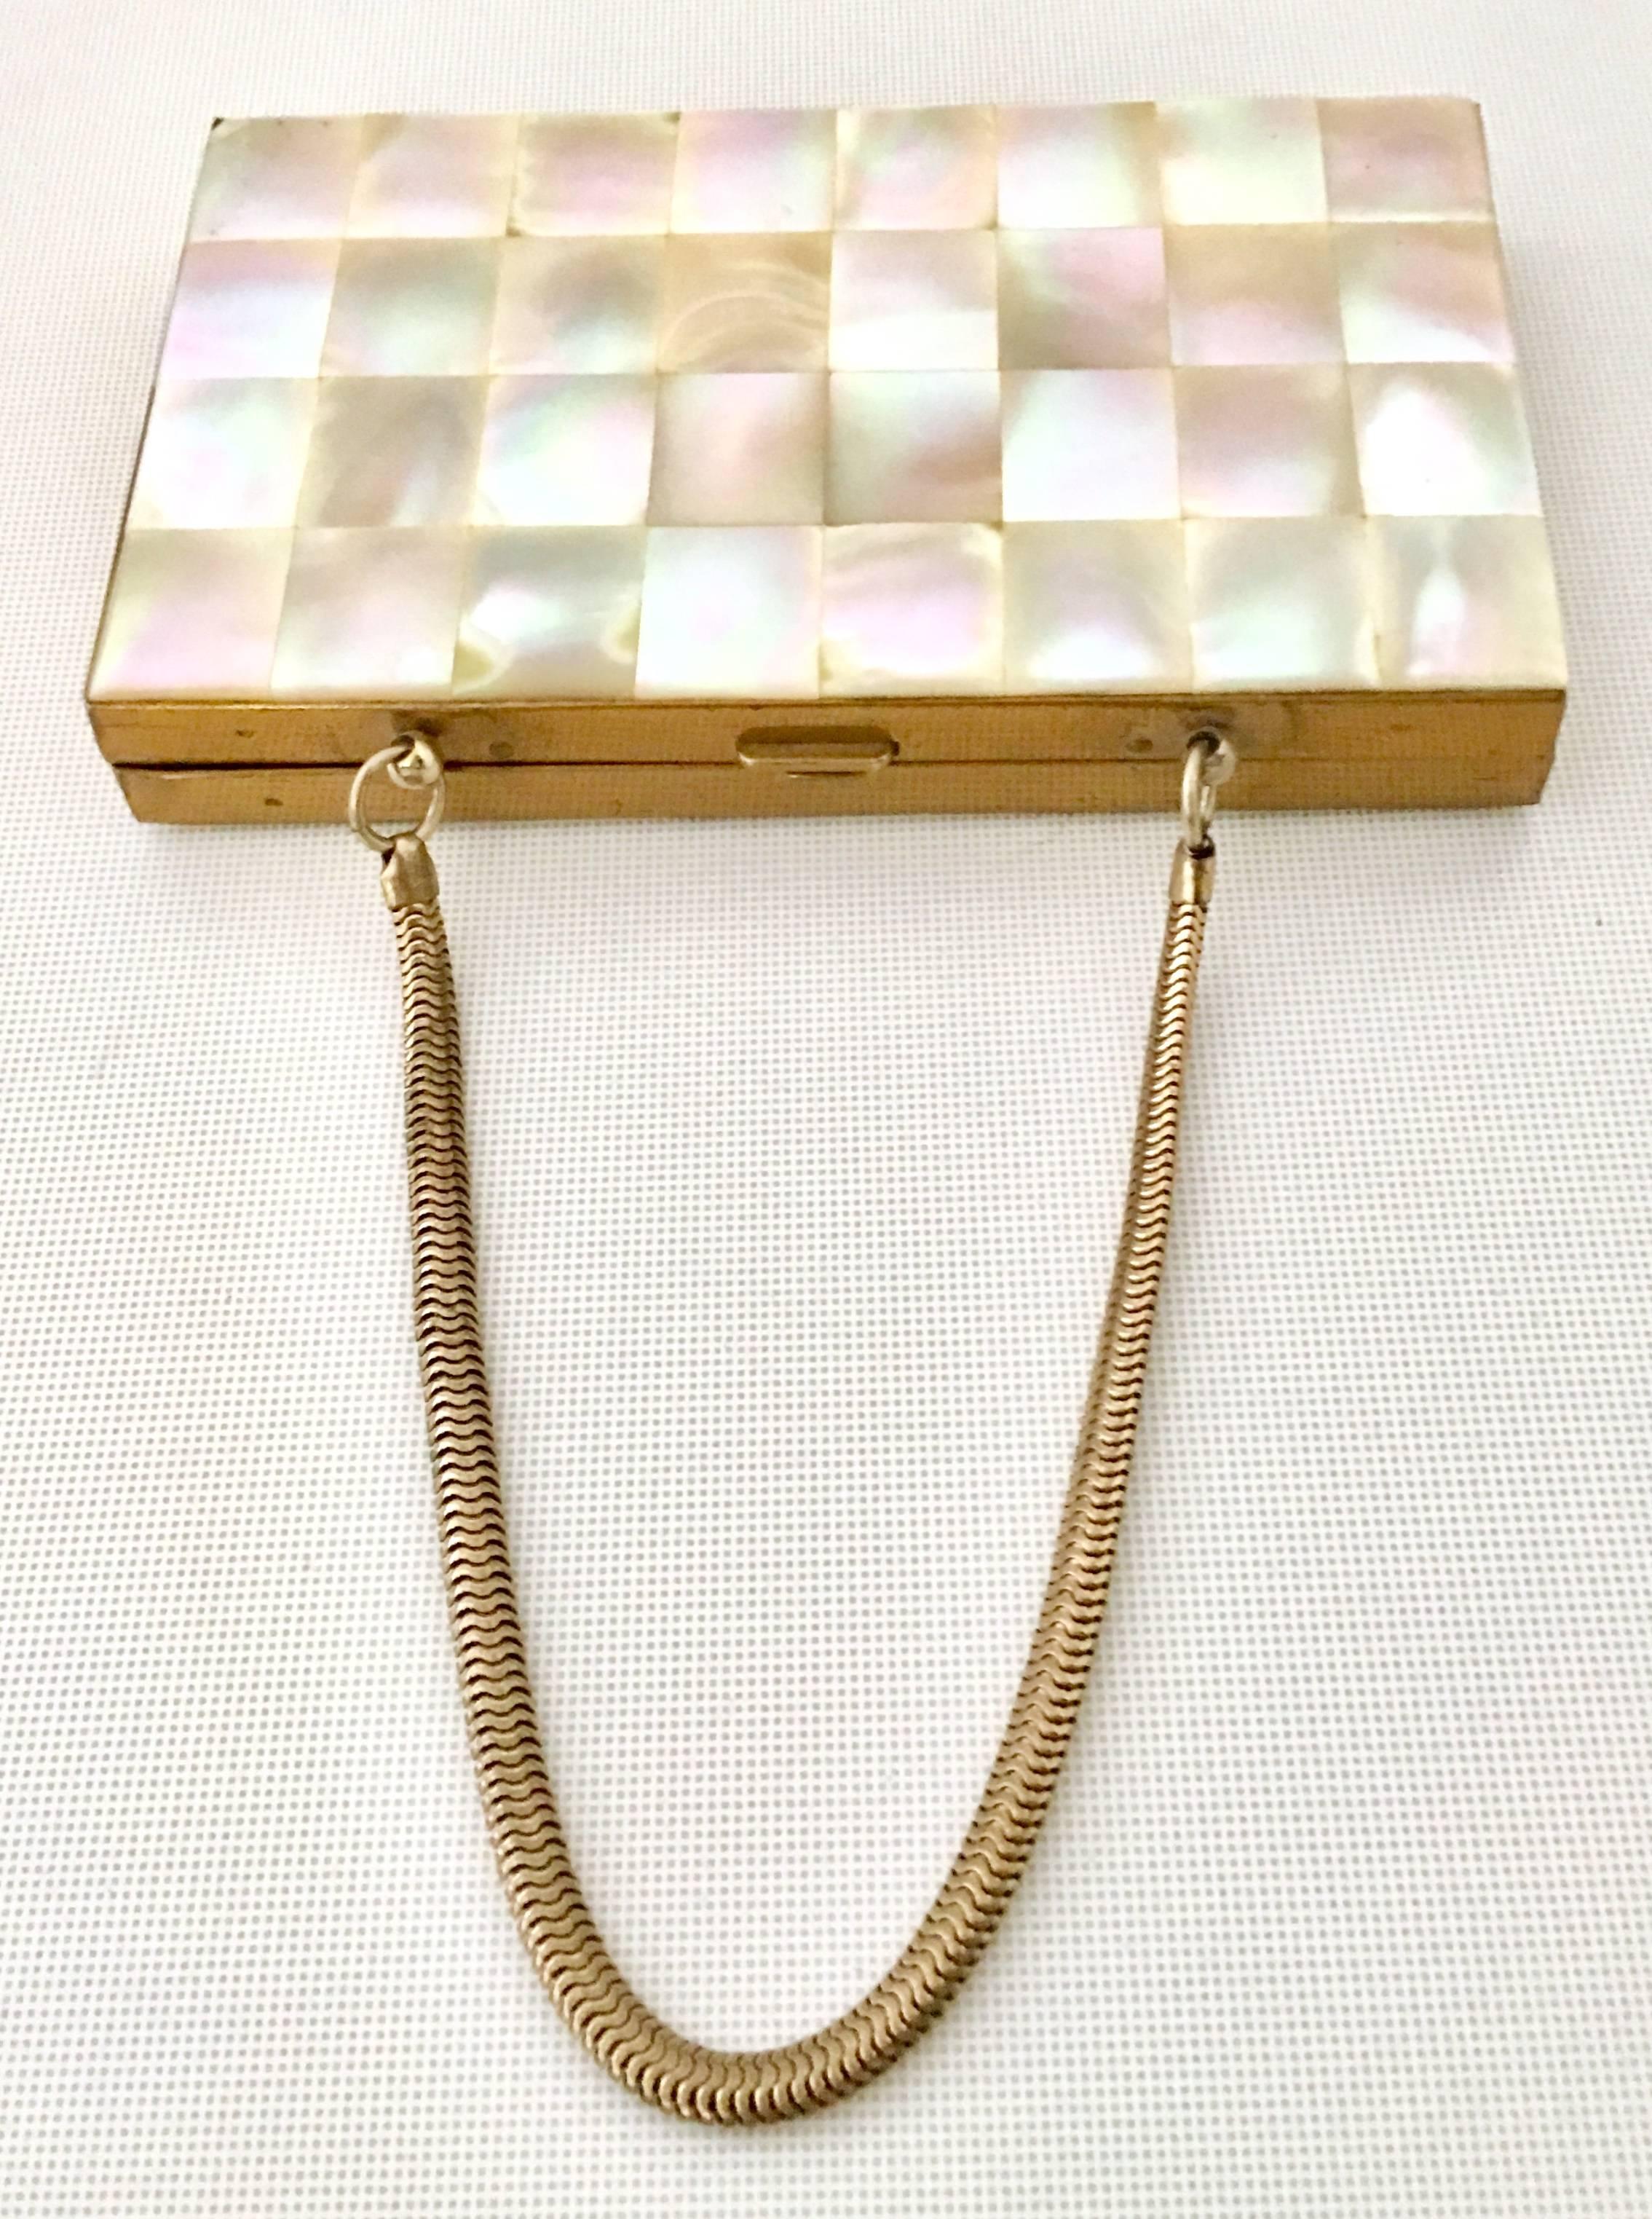 1940'S Exquisite & Rare Double Sided Mother Of Pearl and Brass Minauiere Compact. This checker pattern, double sided hard case finished in mother of pearl brass compact features a coil snake handle of gold plate and a interior with 